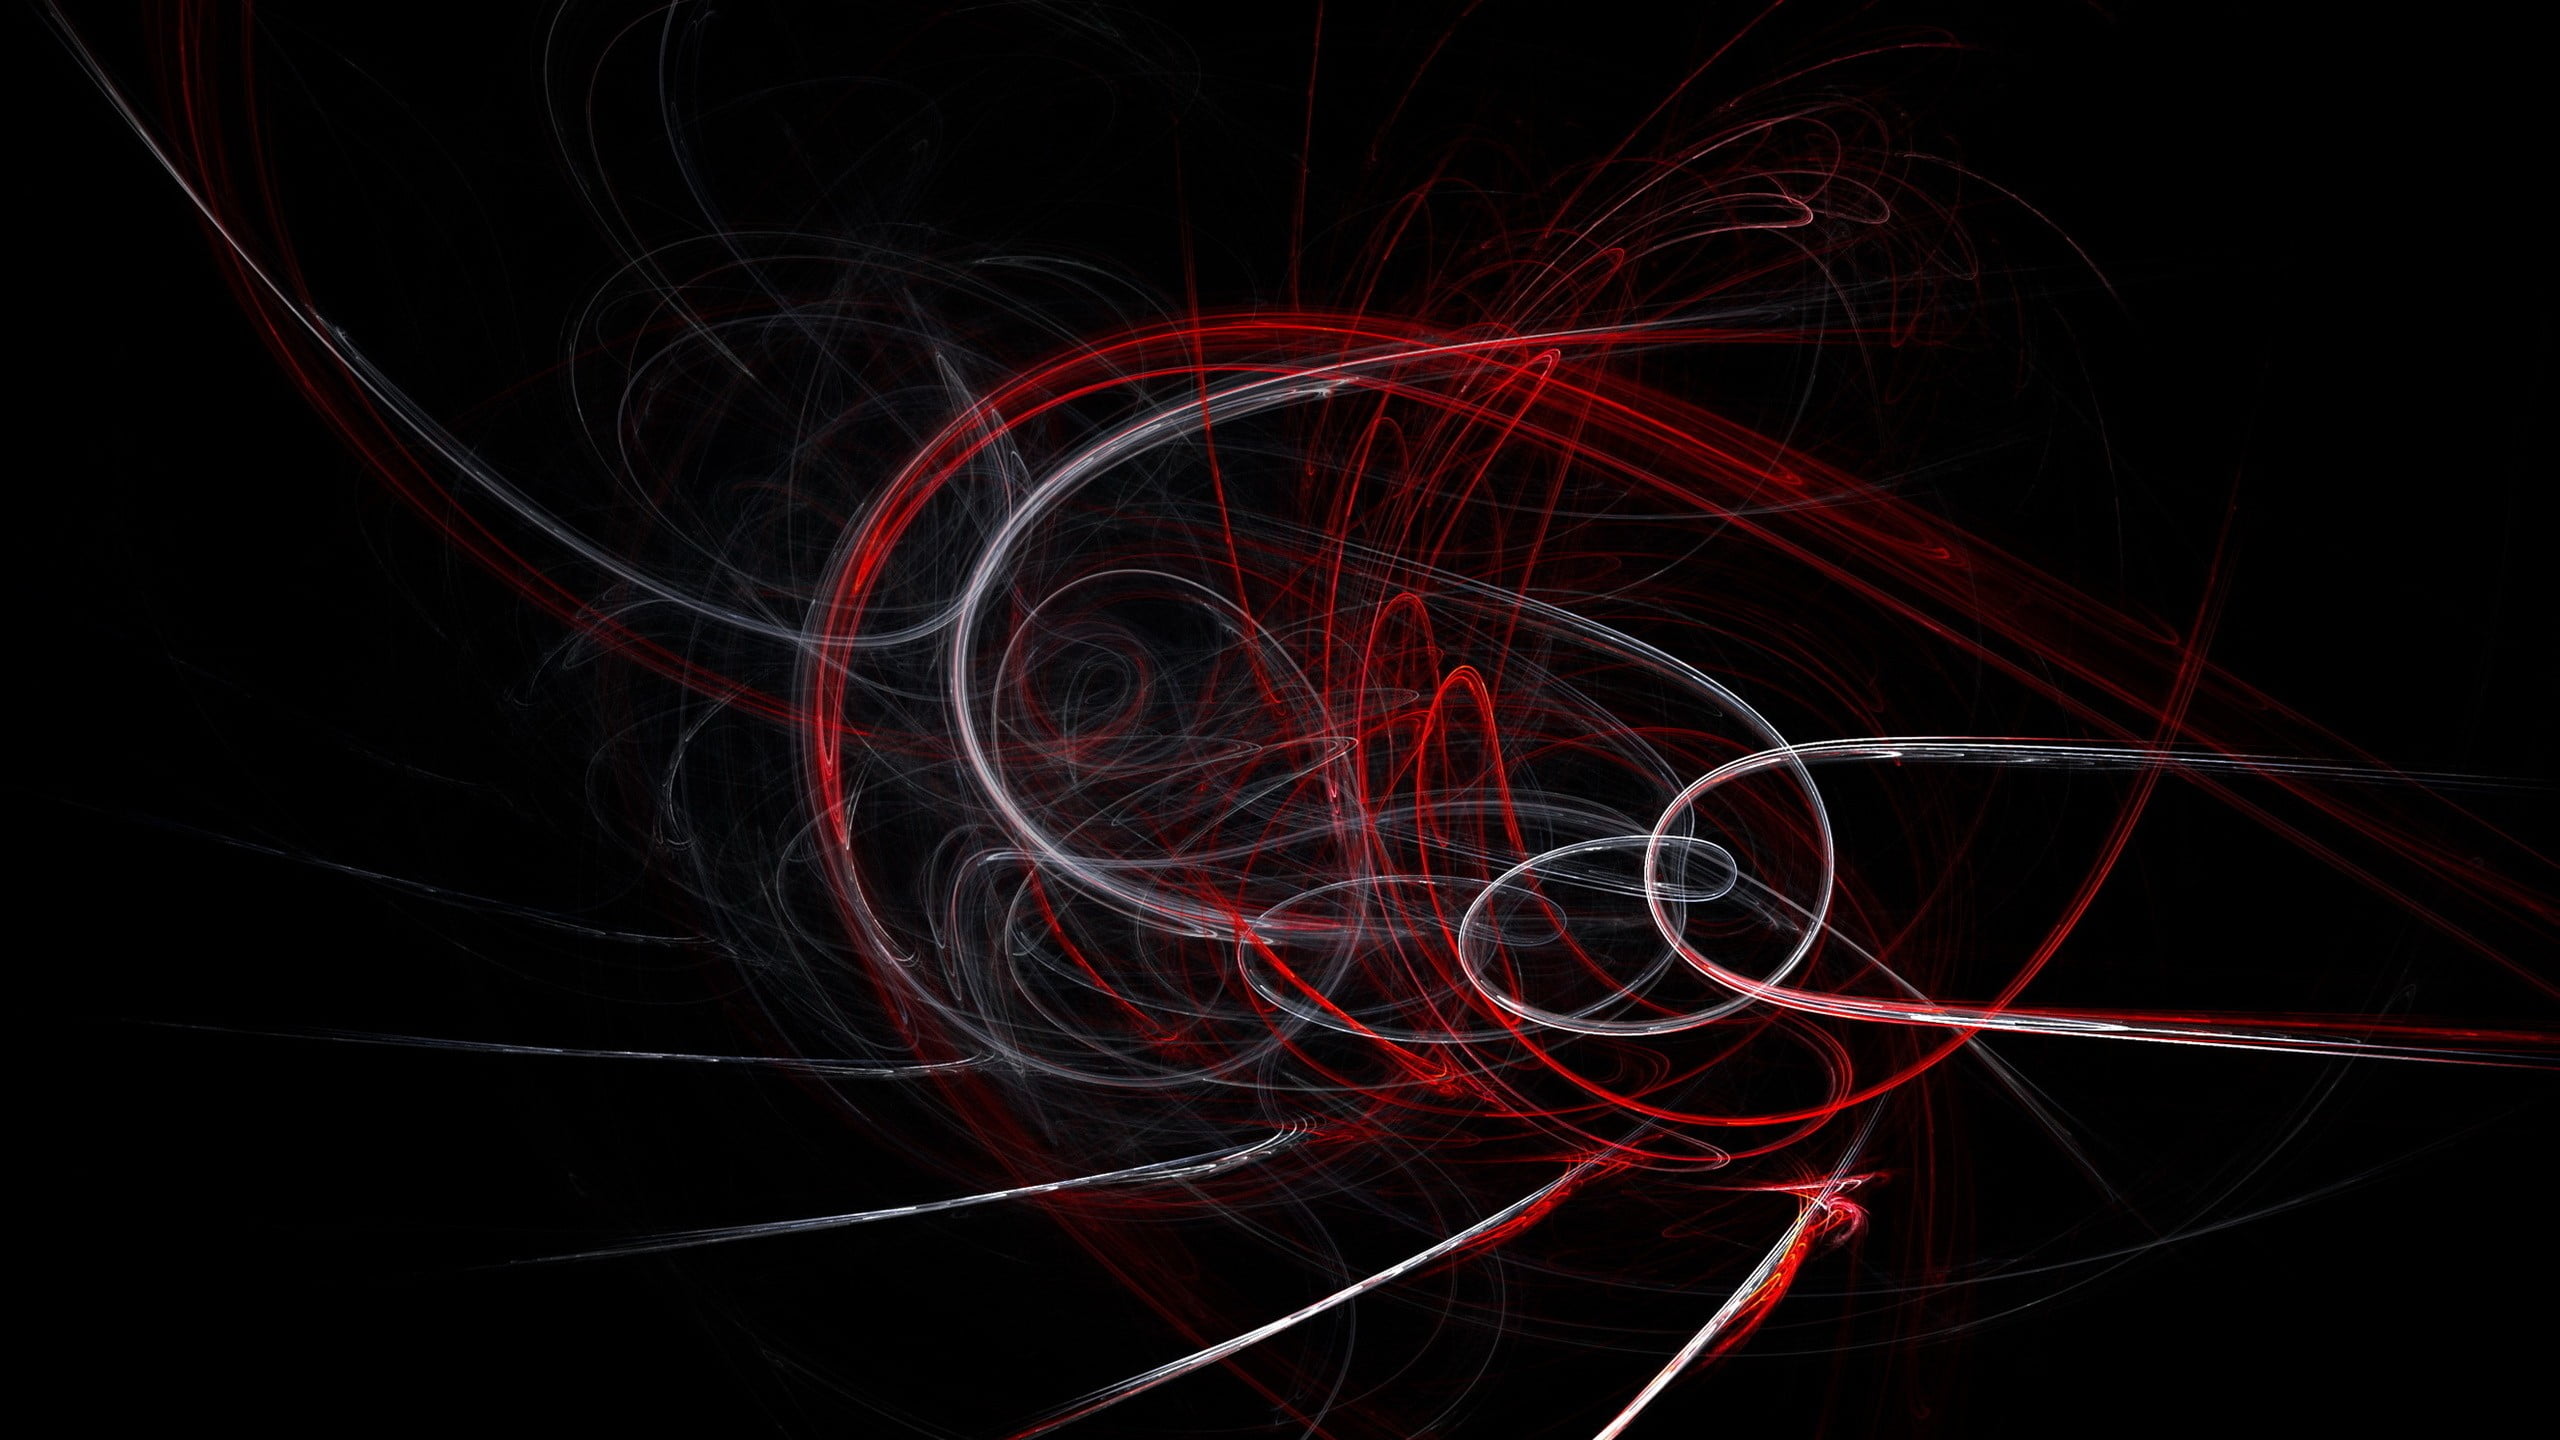 white, red, and black abstract digital wallpaper, abstract, shapes, dark, lines